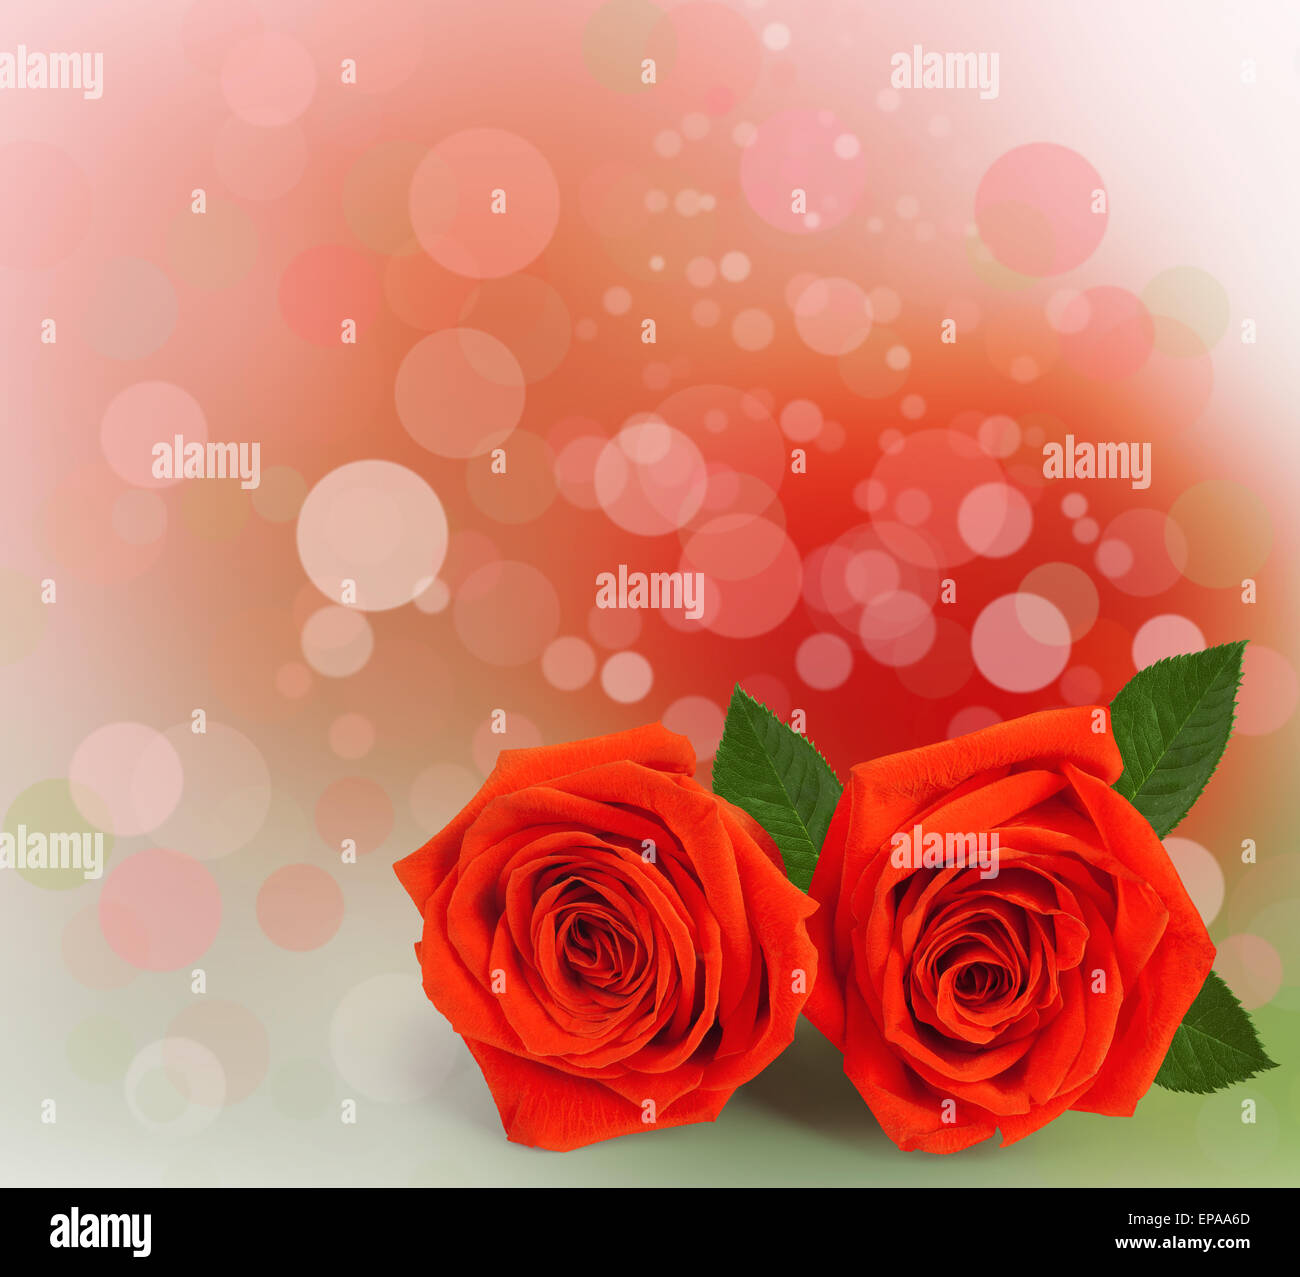 Bouquet of red roses with green leaves on the abstract background with bokeh effect Stock Photo